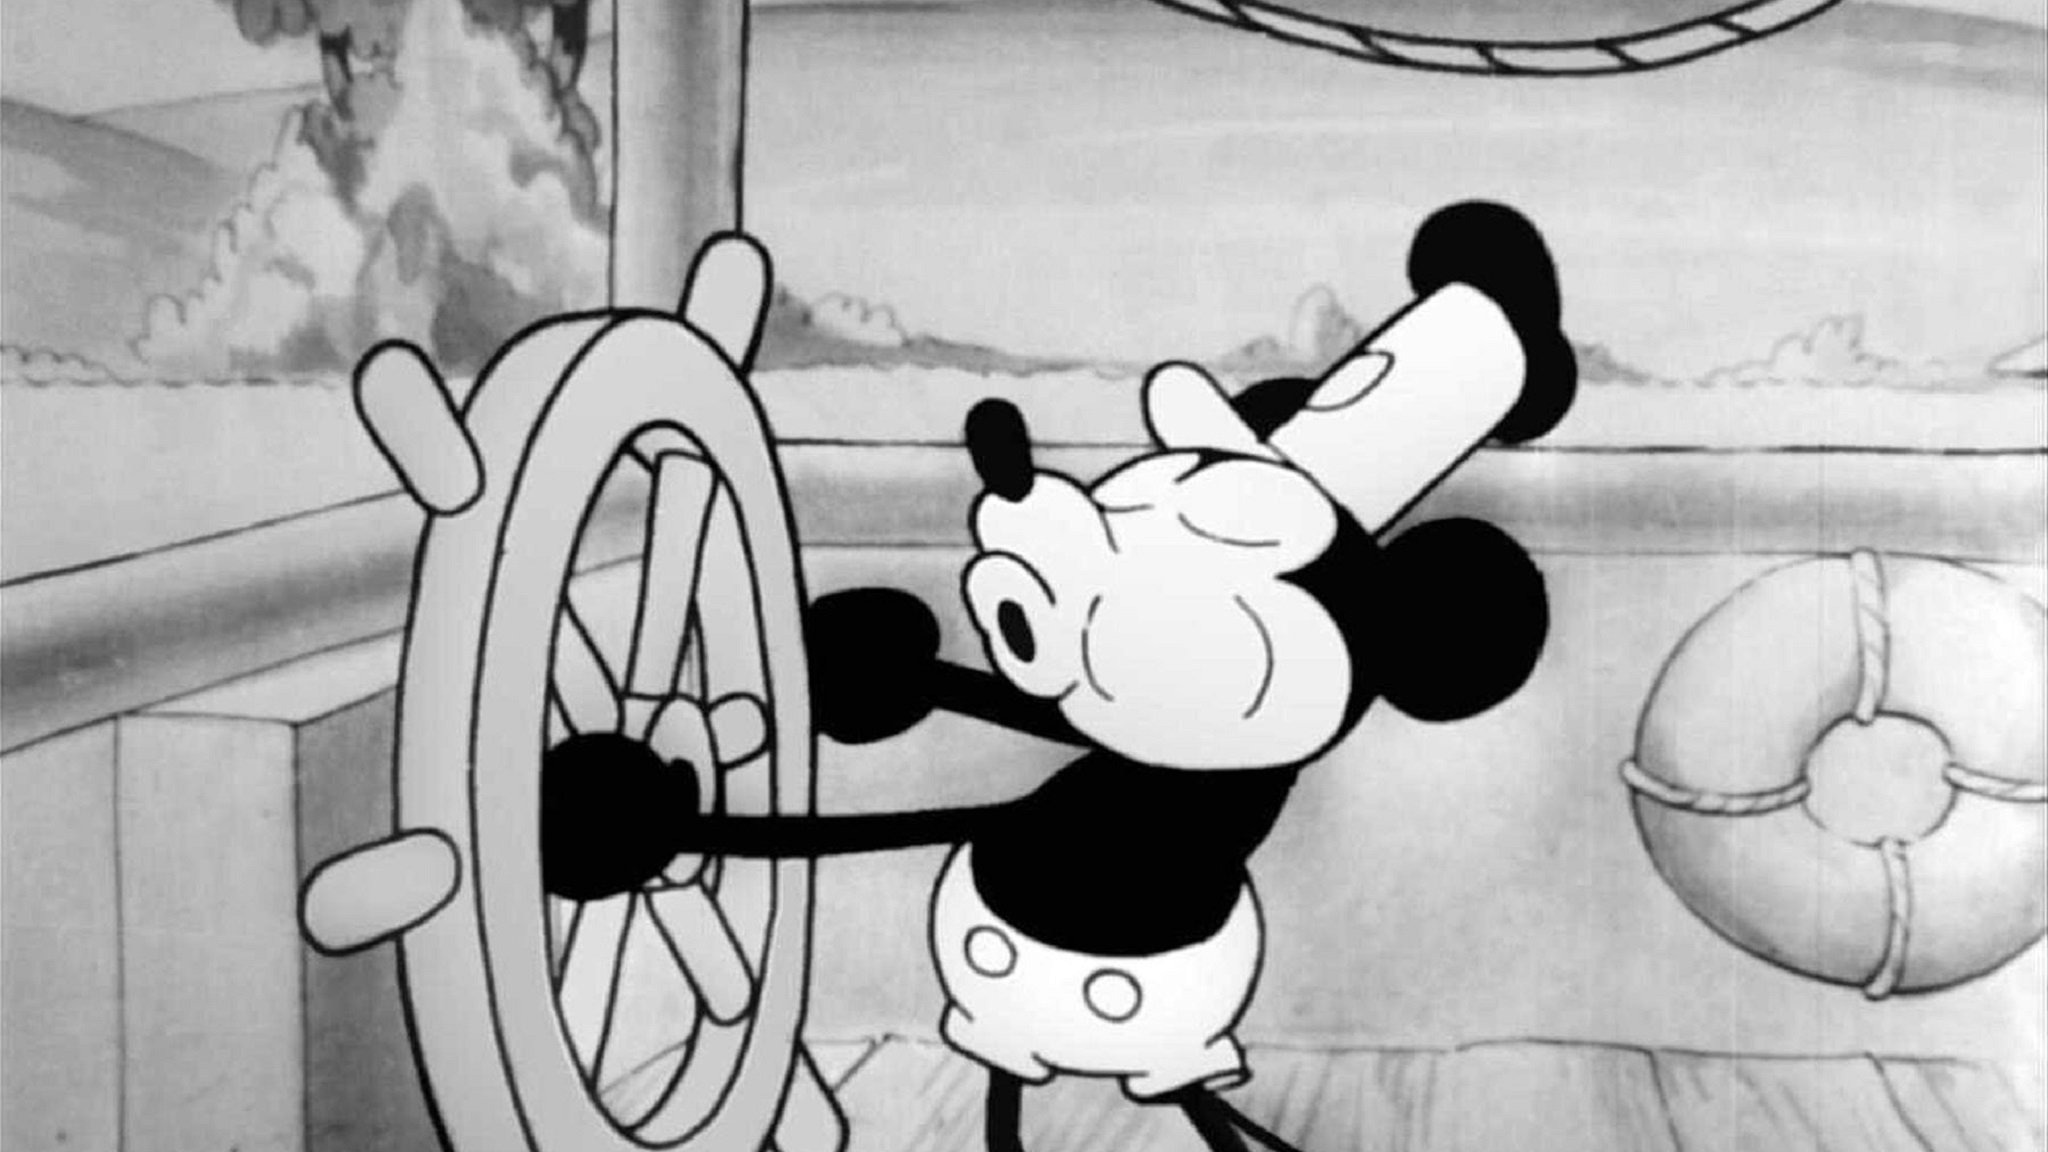 Micky Maus in "Steamboat Willie"